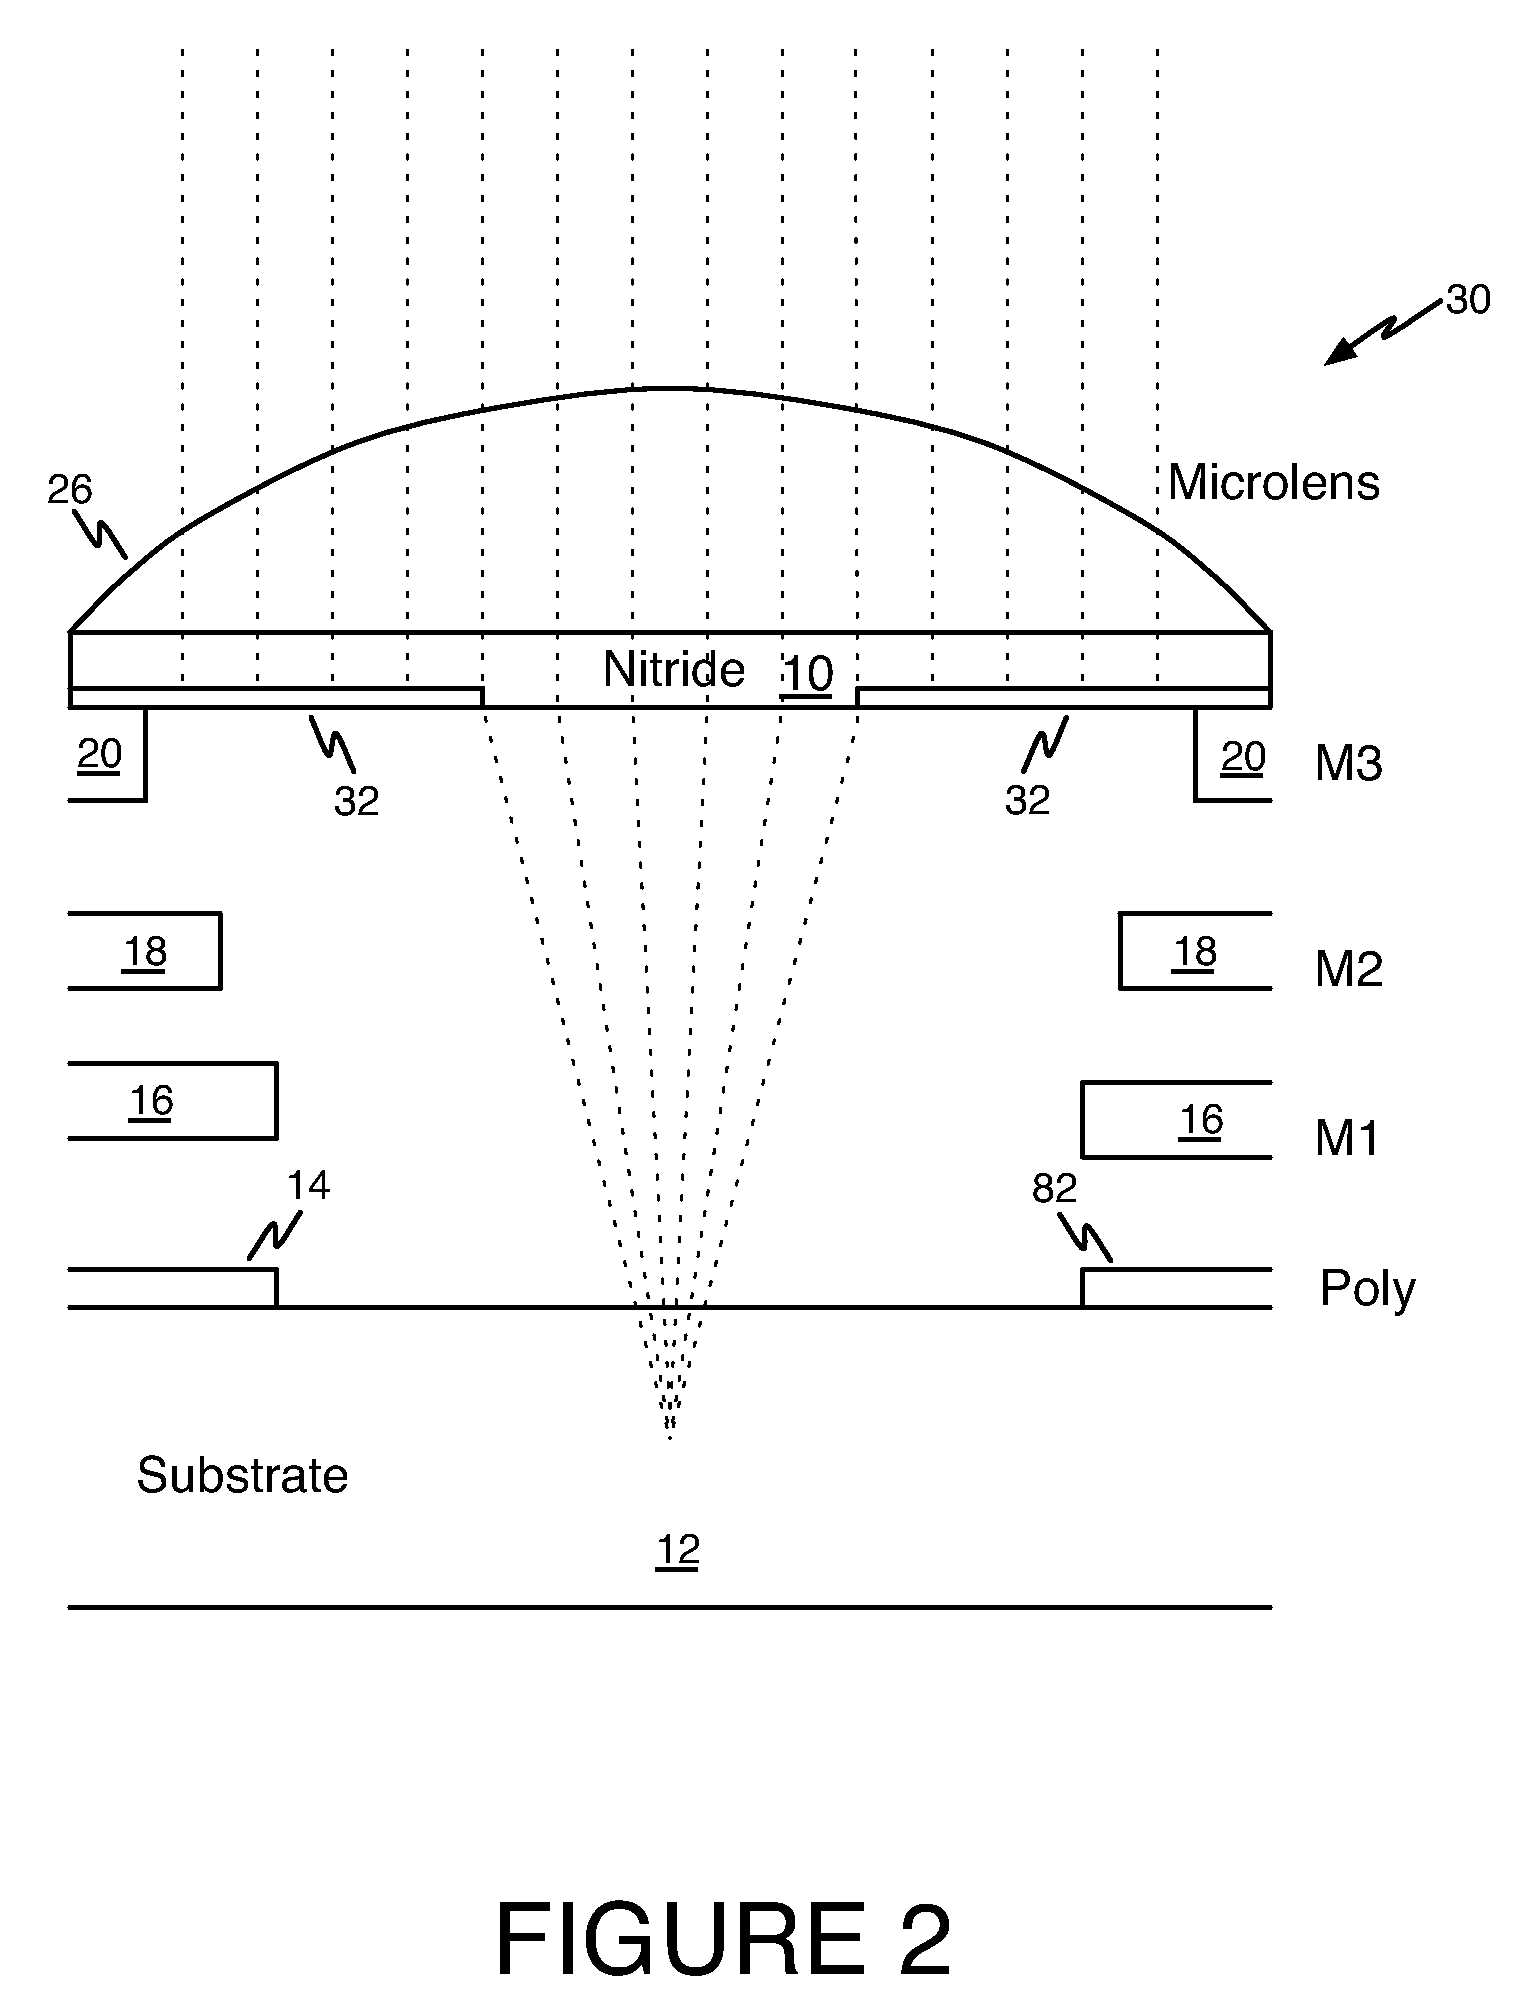 Imaging array having photodiodes with different light sensitivities and associated image restoration methods